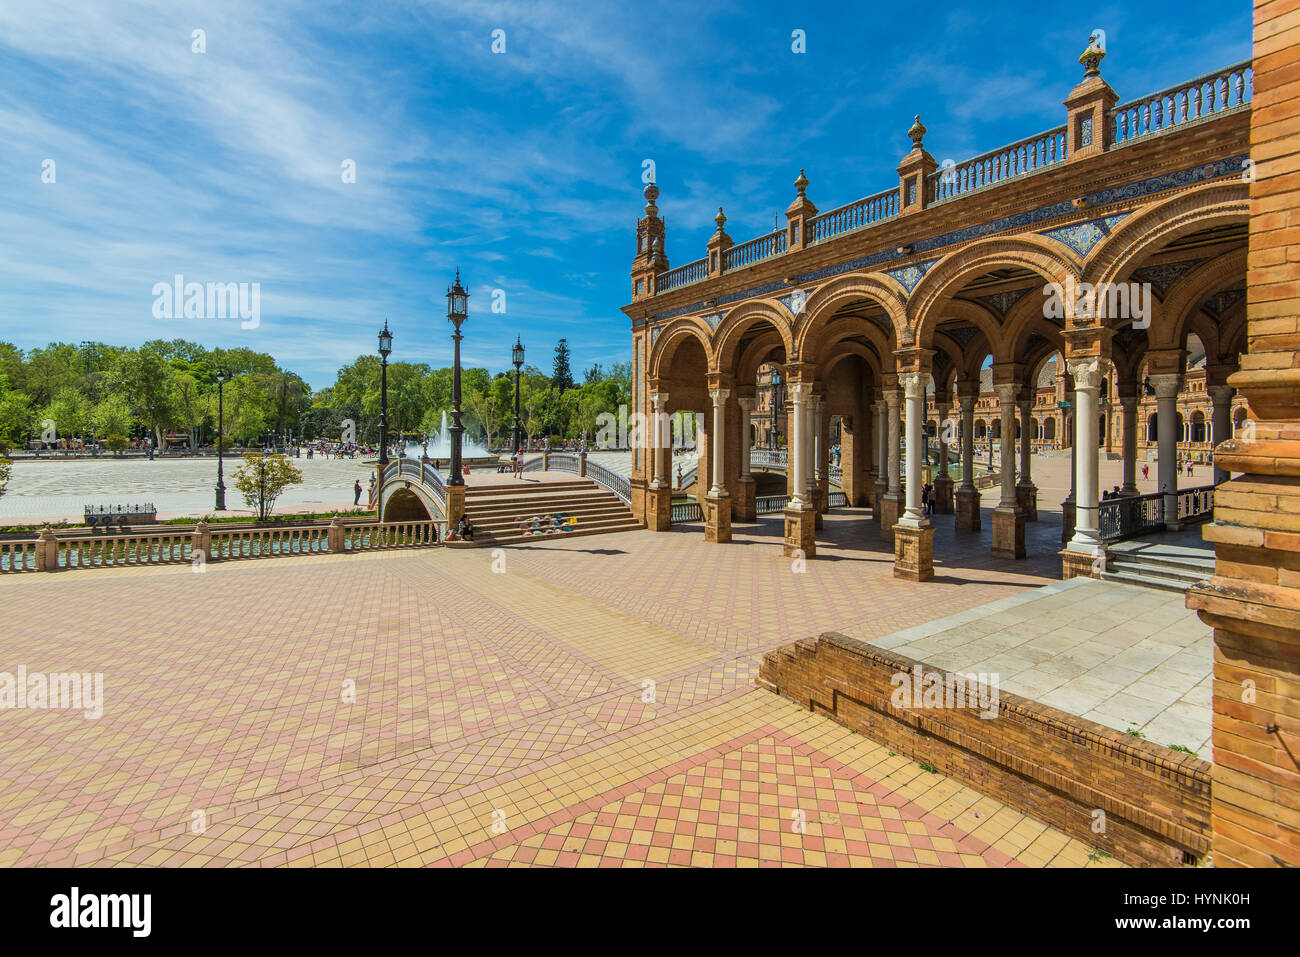 Plaza de Espana in Sevilla, Spain most famous and beautiful touristic place to visit. Stock Photo